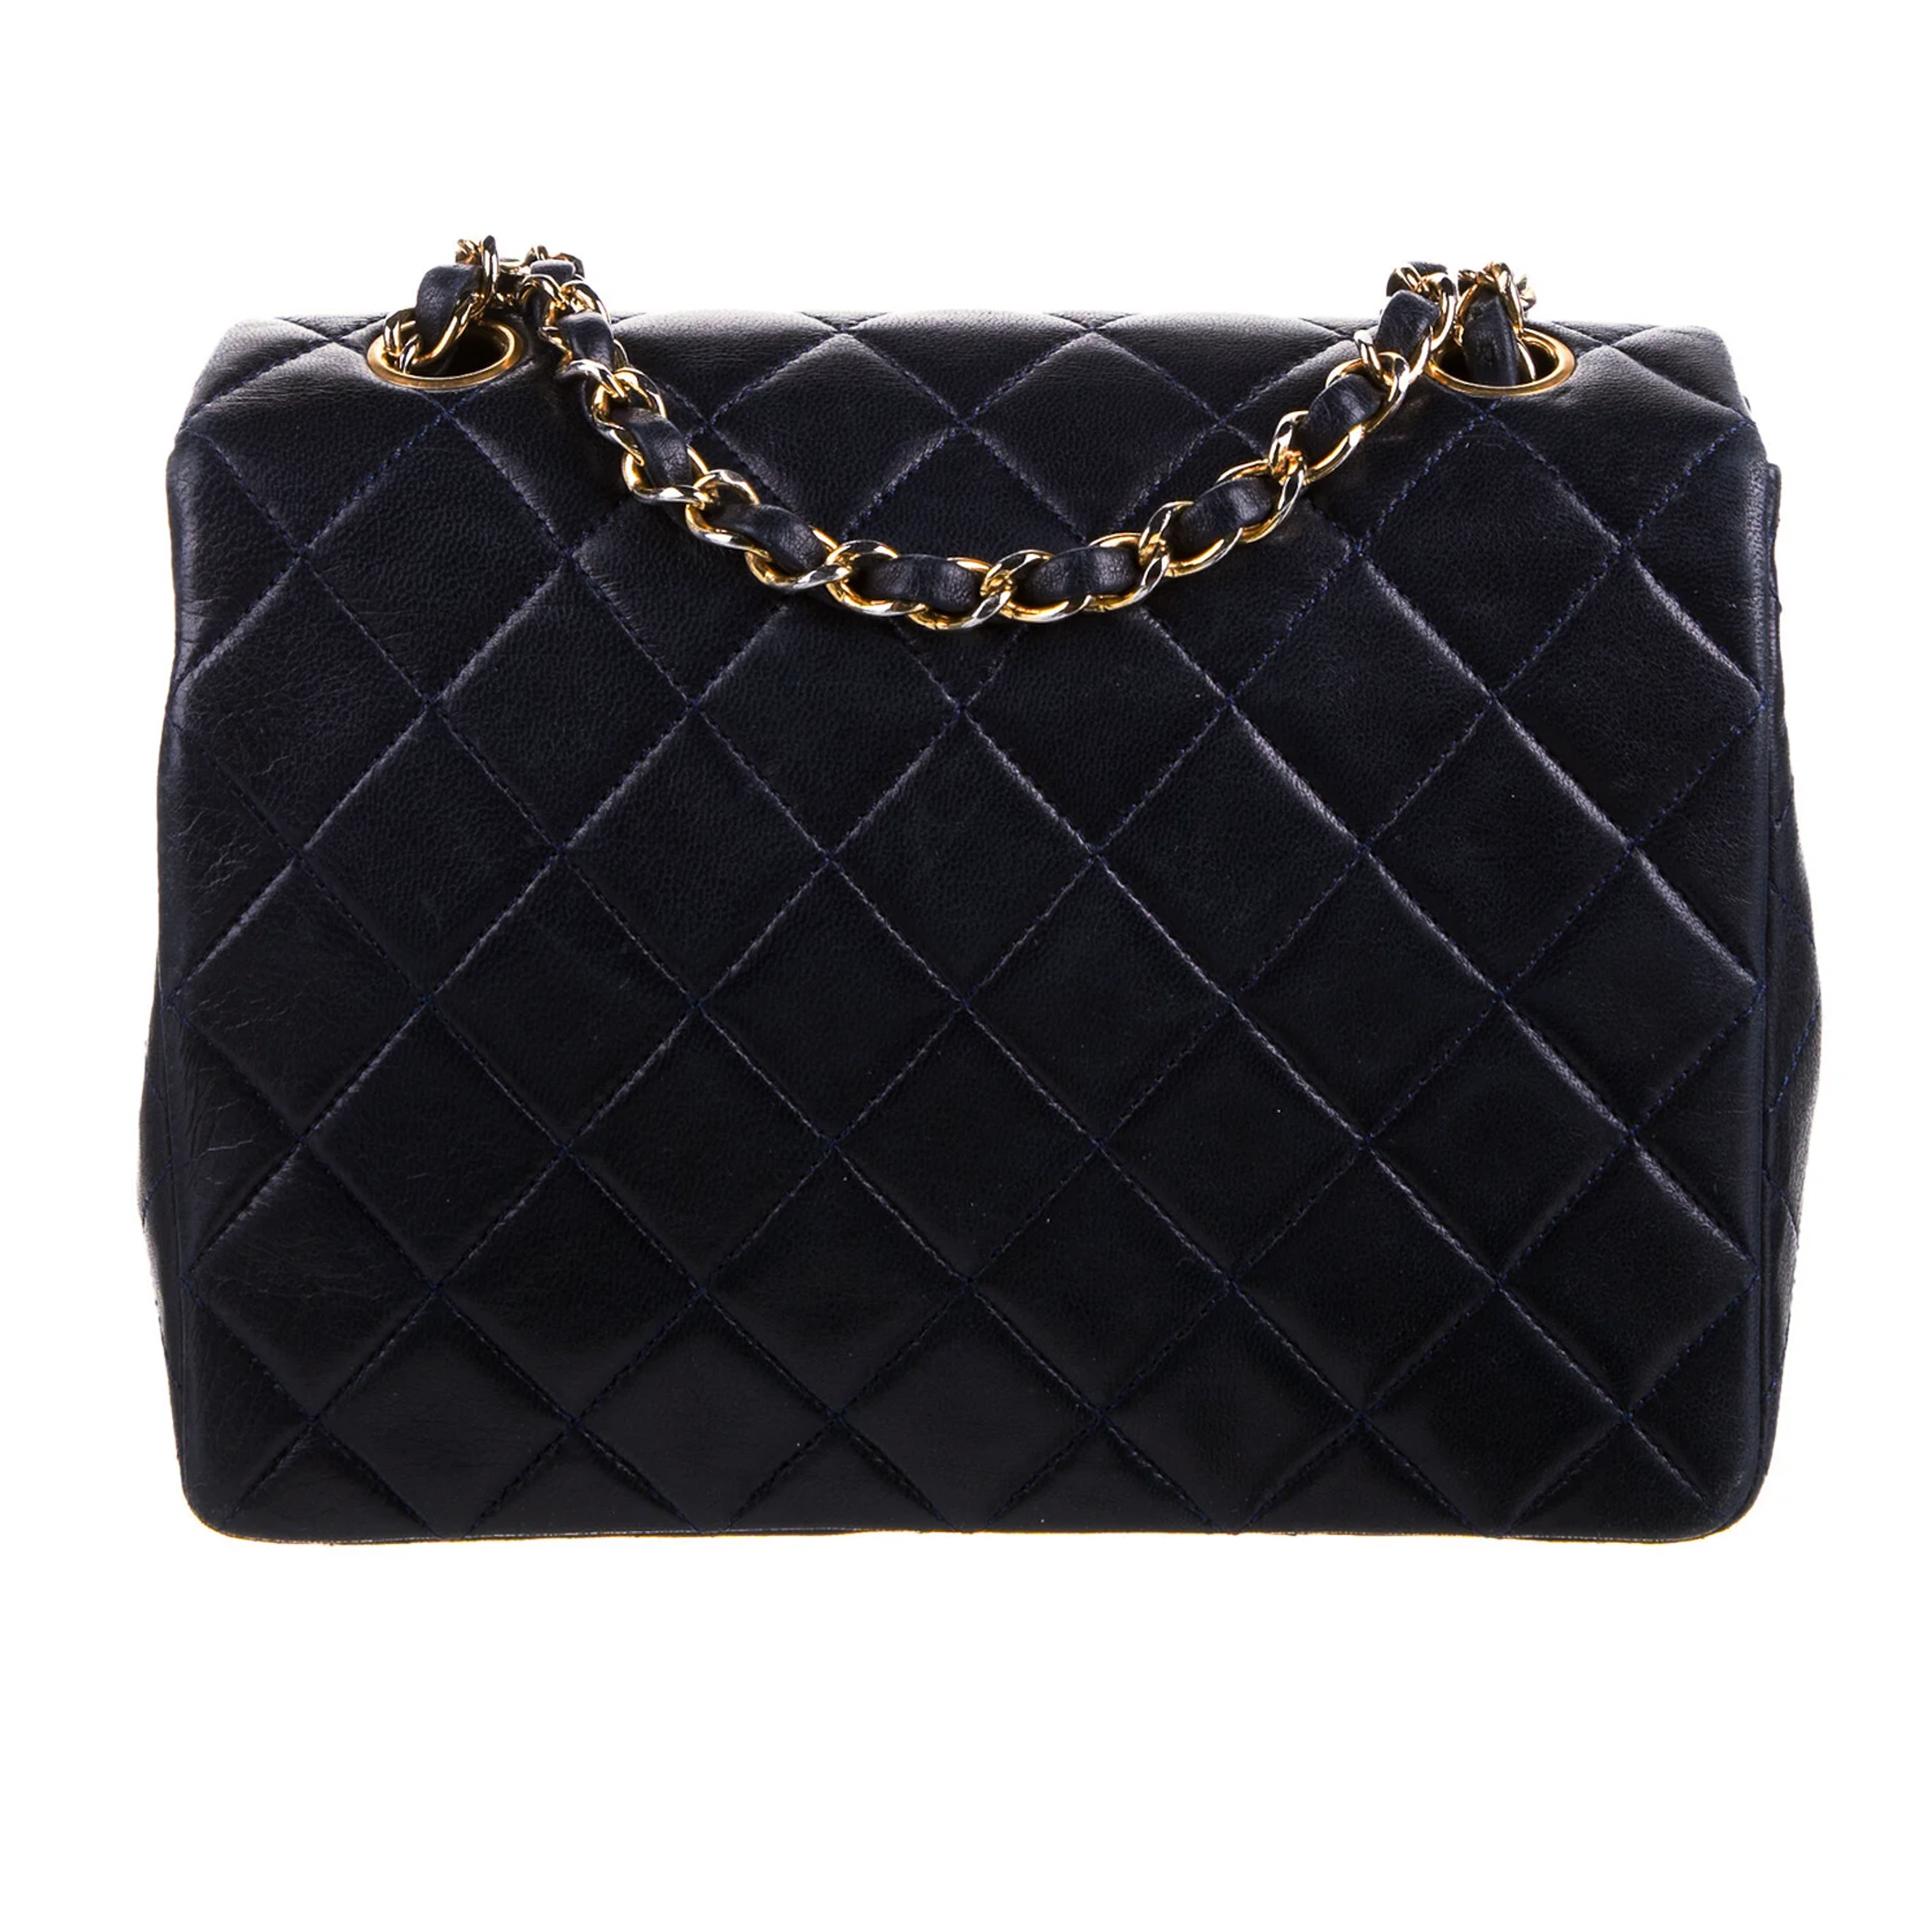 Black Chanel Navy Blue Lambskin Small Square Vintage 90s Classic Flap Bag 